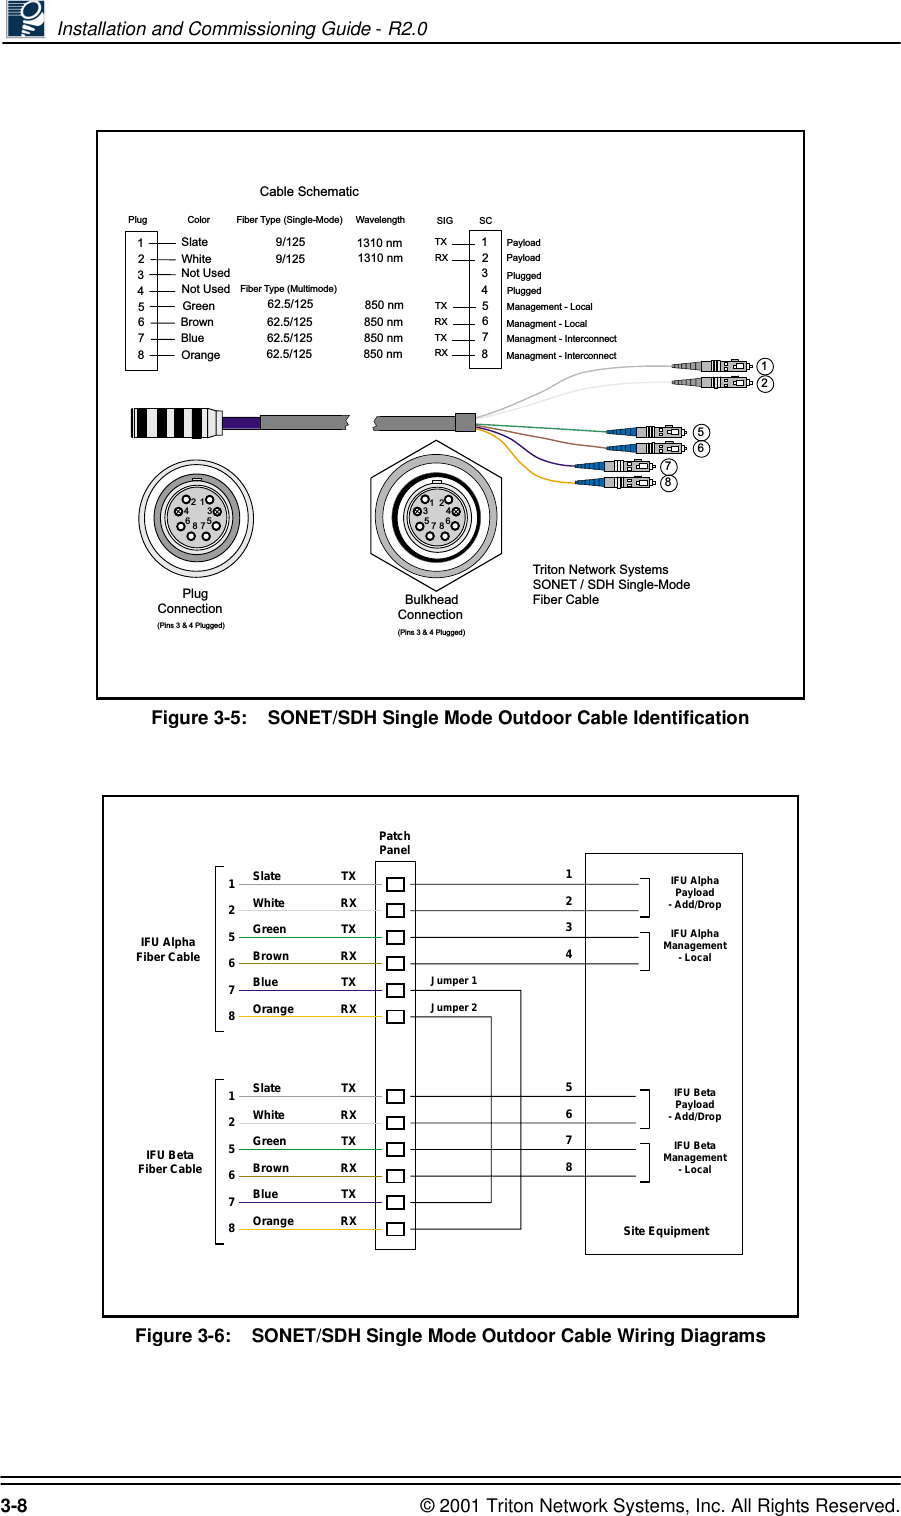  Installation and Commissioning Guide - R2.03-8 © 2001 Triton Network Systems, Inc. All Rights Reserved.Figure 3-5:    SONET/SDH Single Mode Outdoor Cable IdentificationFigure 3-6:    SONET/SDH Single Mode Outdoor Cable Wiring Diagrams       PlugConnection   BulkheadConnectionCable SchematicTriton Network SystemsSONET / SDH Single-ModeFiber CableBlue     9/125 1310 nm1White62.5/125   850 nm8Orange     9/125 1310 nm23Not Used4Not Used5Brown 62.5/125   850 nm6Slate62.5/125   850 nm7Plug Color Fiber Type (Single-Mode)Fiber Type (Multimode)Wavelength125678(Pins 3 &amp; 4 Plugged) (Pins 3 &amp; 4 Plugged)Green 62.5/125   850 nm18234567SCSIGTXTXTXRXRXRXPayloadPayloadManagement - LocalManagment - LocalManagment - InterconnectManagment - InterconnectPluggedPlugged1243657812345687PatchPanelIFU AlphaFiber CableIFU BetaFiber Cable12567812567812345678IFU AlphaPayload- Add/DropIFU AlphaManagement- LocalIFU BetaPayload- Add/DropIFU BetaManagement- LocalSite EquipmentJumper 1Jumper 2SlateWhiteGreenBrownBlueOrangeSlateWhiteGreenBrownBlueOrangeTXRXTXRXTXRXTXRXTXRXTXRX